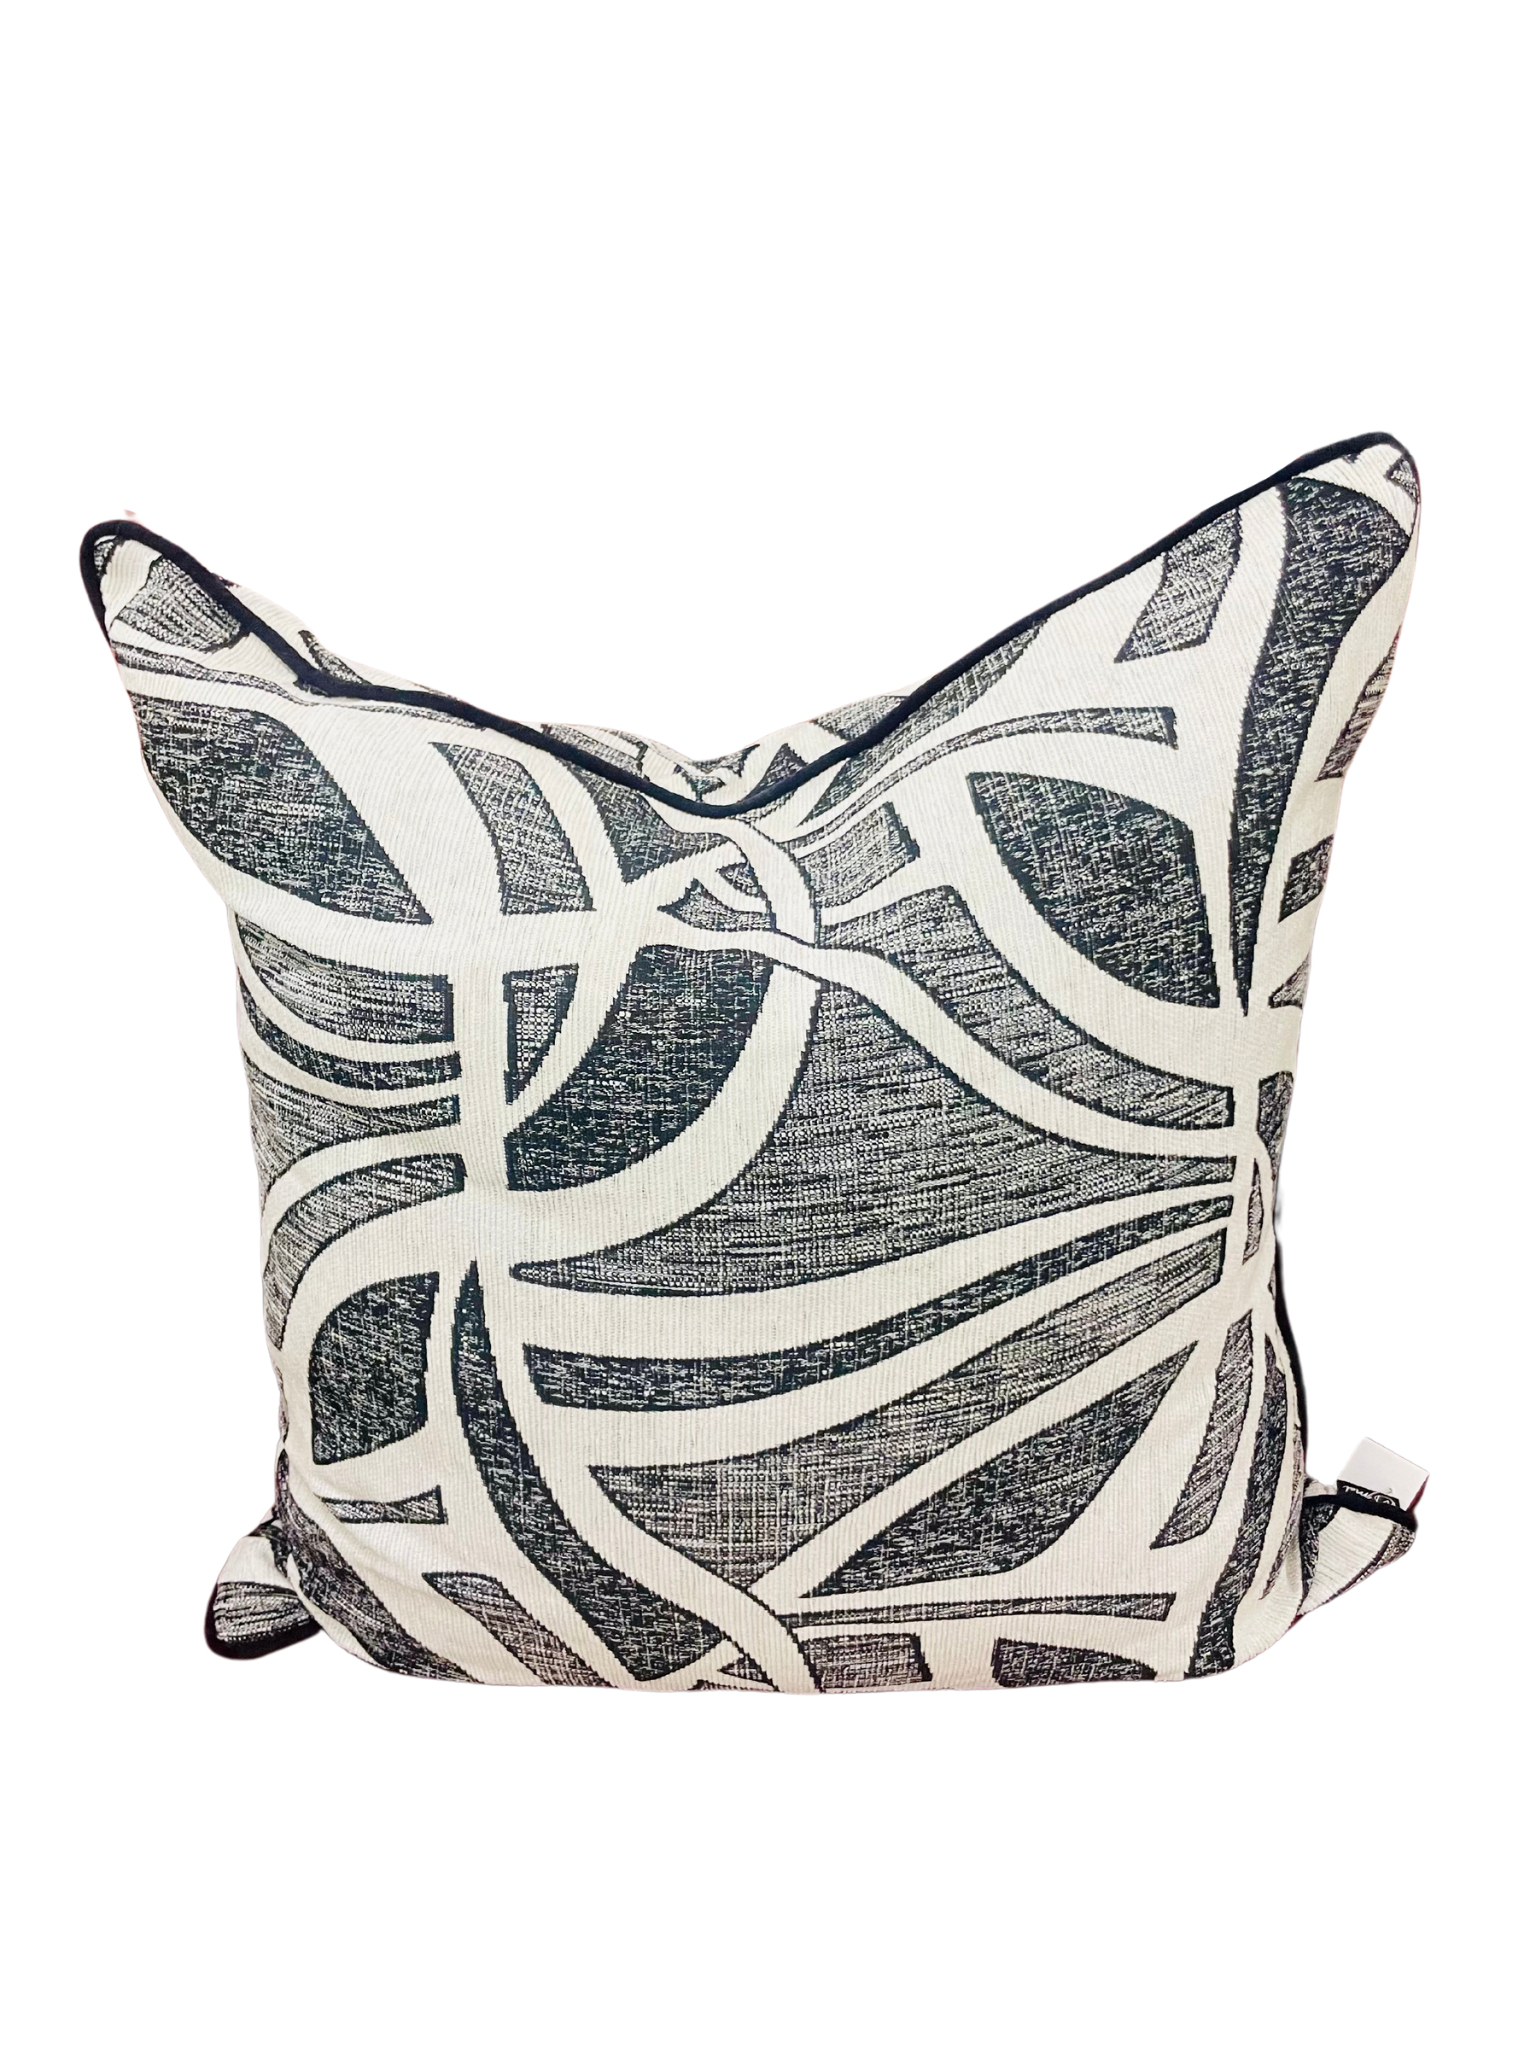 Black and White Abstract Scatter Pillow